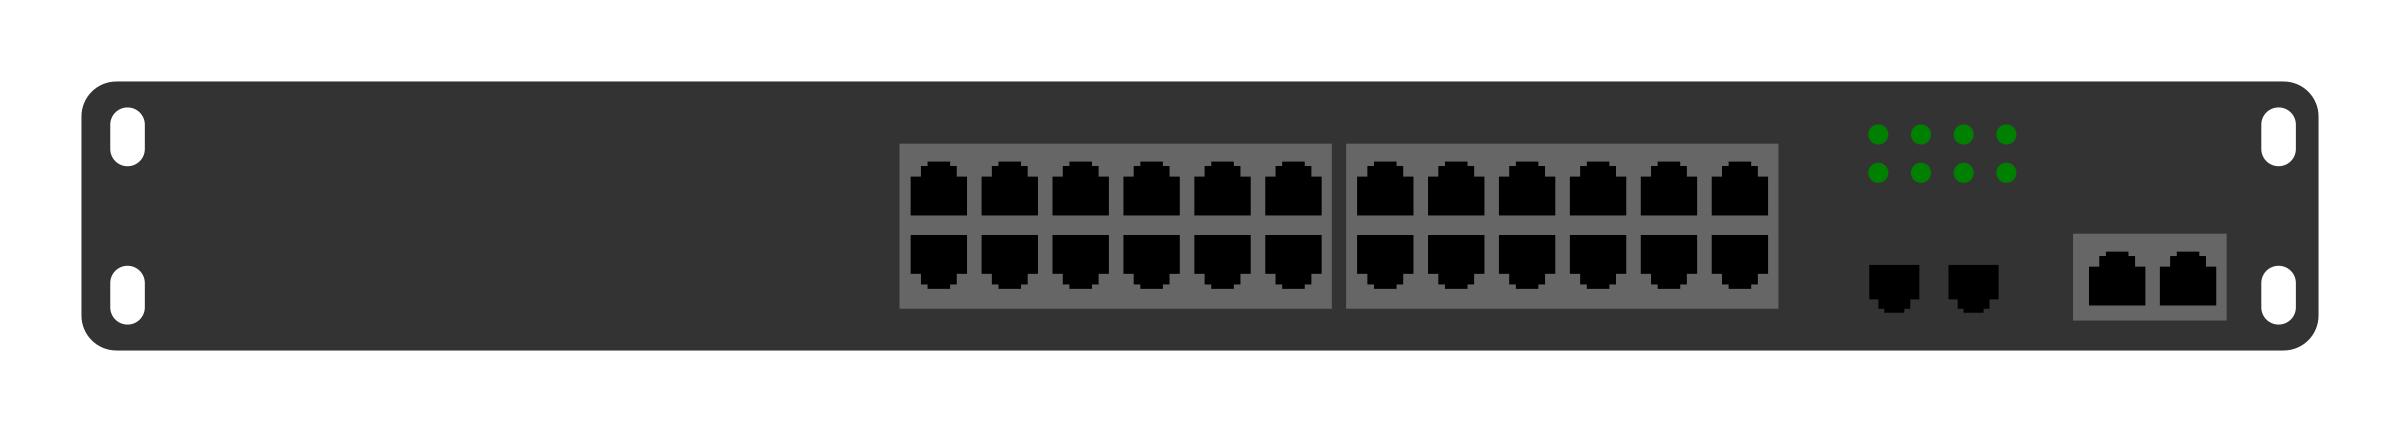 Dell Power Connect 3532P Switch PNG icons